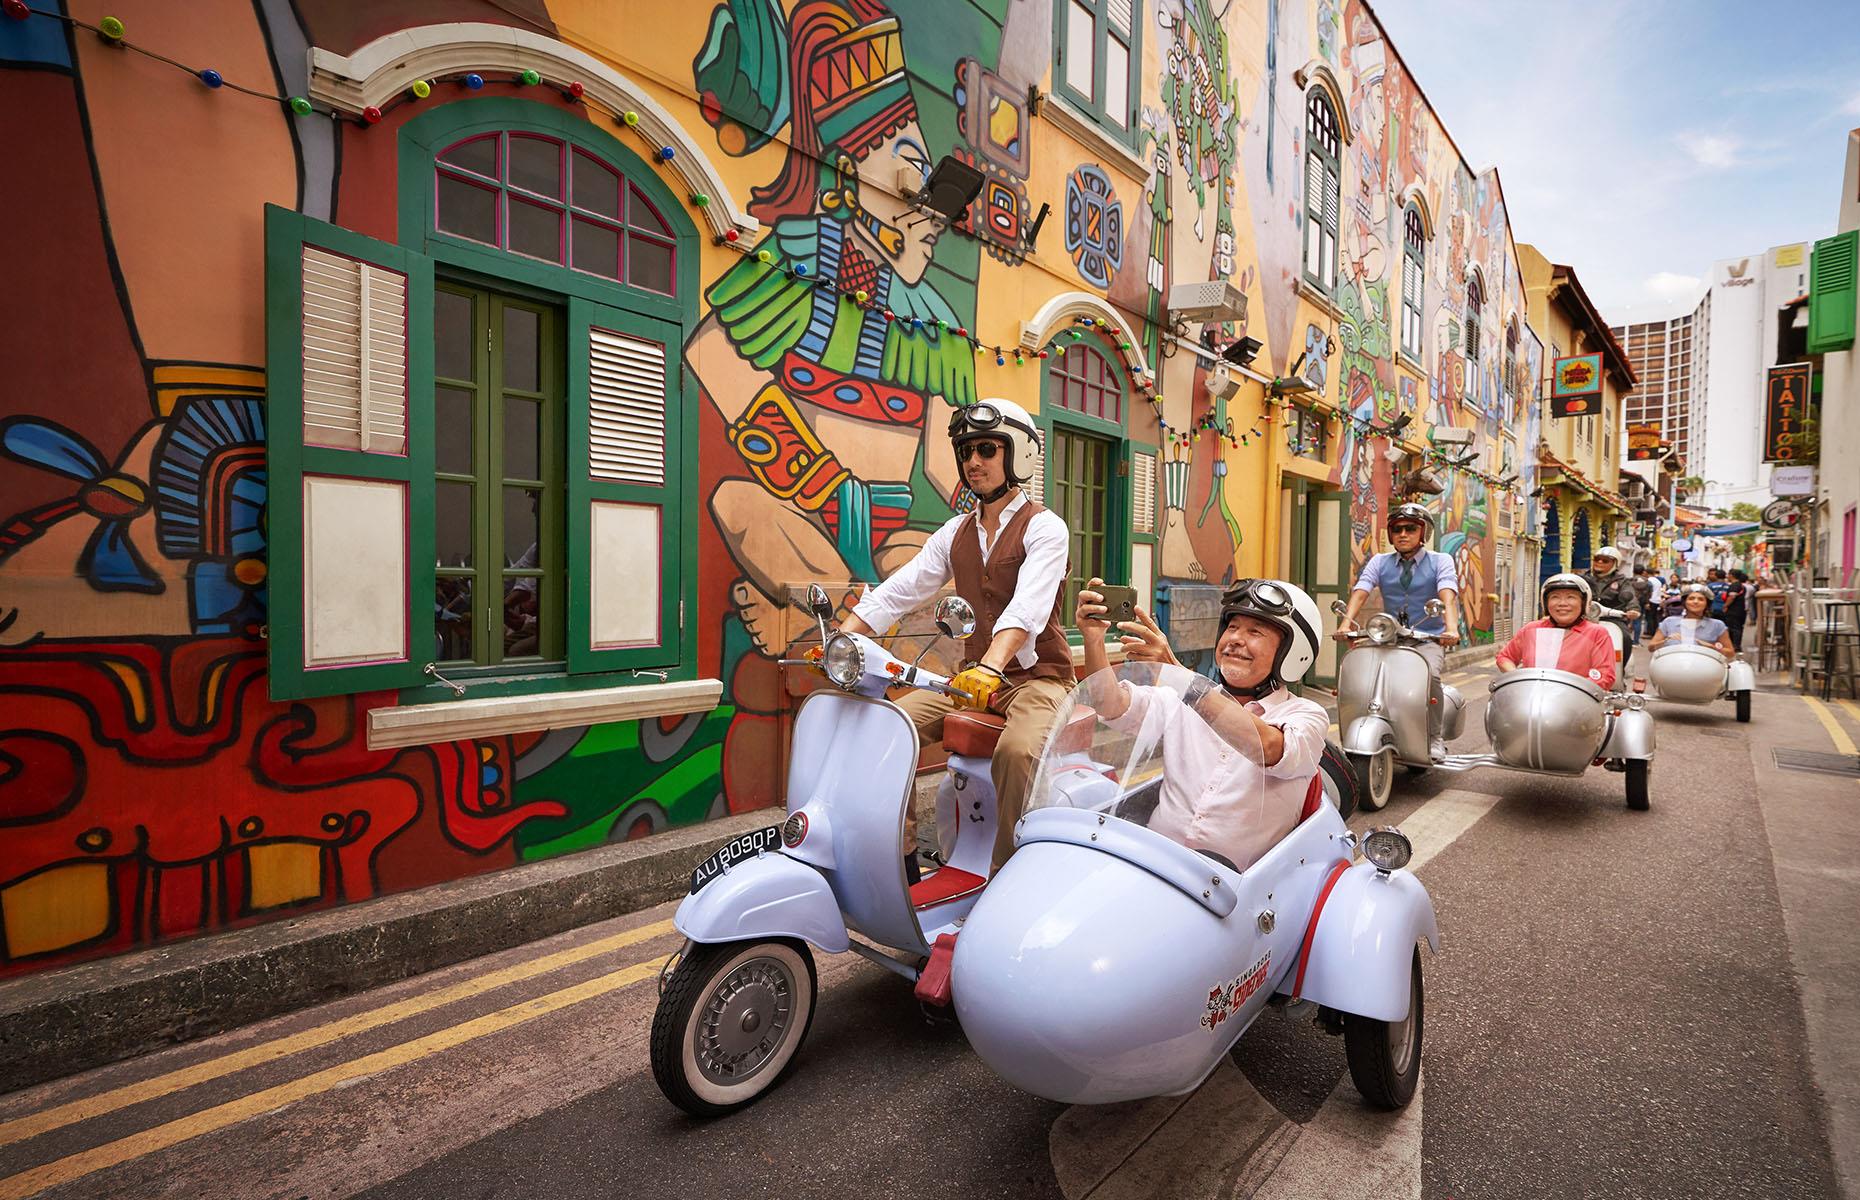 <p>For a unique way of seeing Singapore, take a <a href="https://www.sideways.sg/">sidecar tour</a> by night. The brainchild of Simon Wong, this Vespa adventure will whip you around different neighbourhoods and you'll get to choose your route, which can include heritage sites, the island’s landmarks or specific areas such as the beautiful Muslim Quarter, Kampong Gelam. Lasting from one to three hours, you’ll cover a lot of Singapore. Strangers will give you a wave from the sidewalks and if you spot a photo opportunity, fear not, your dedicated rider will happily stop for a snap.</p>